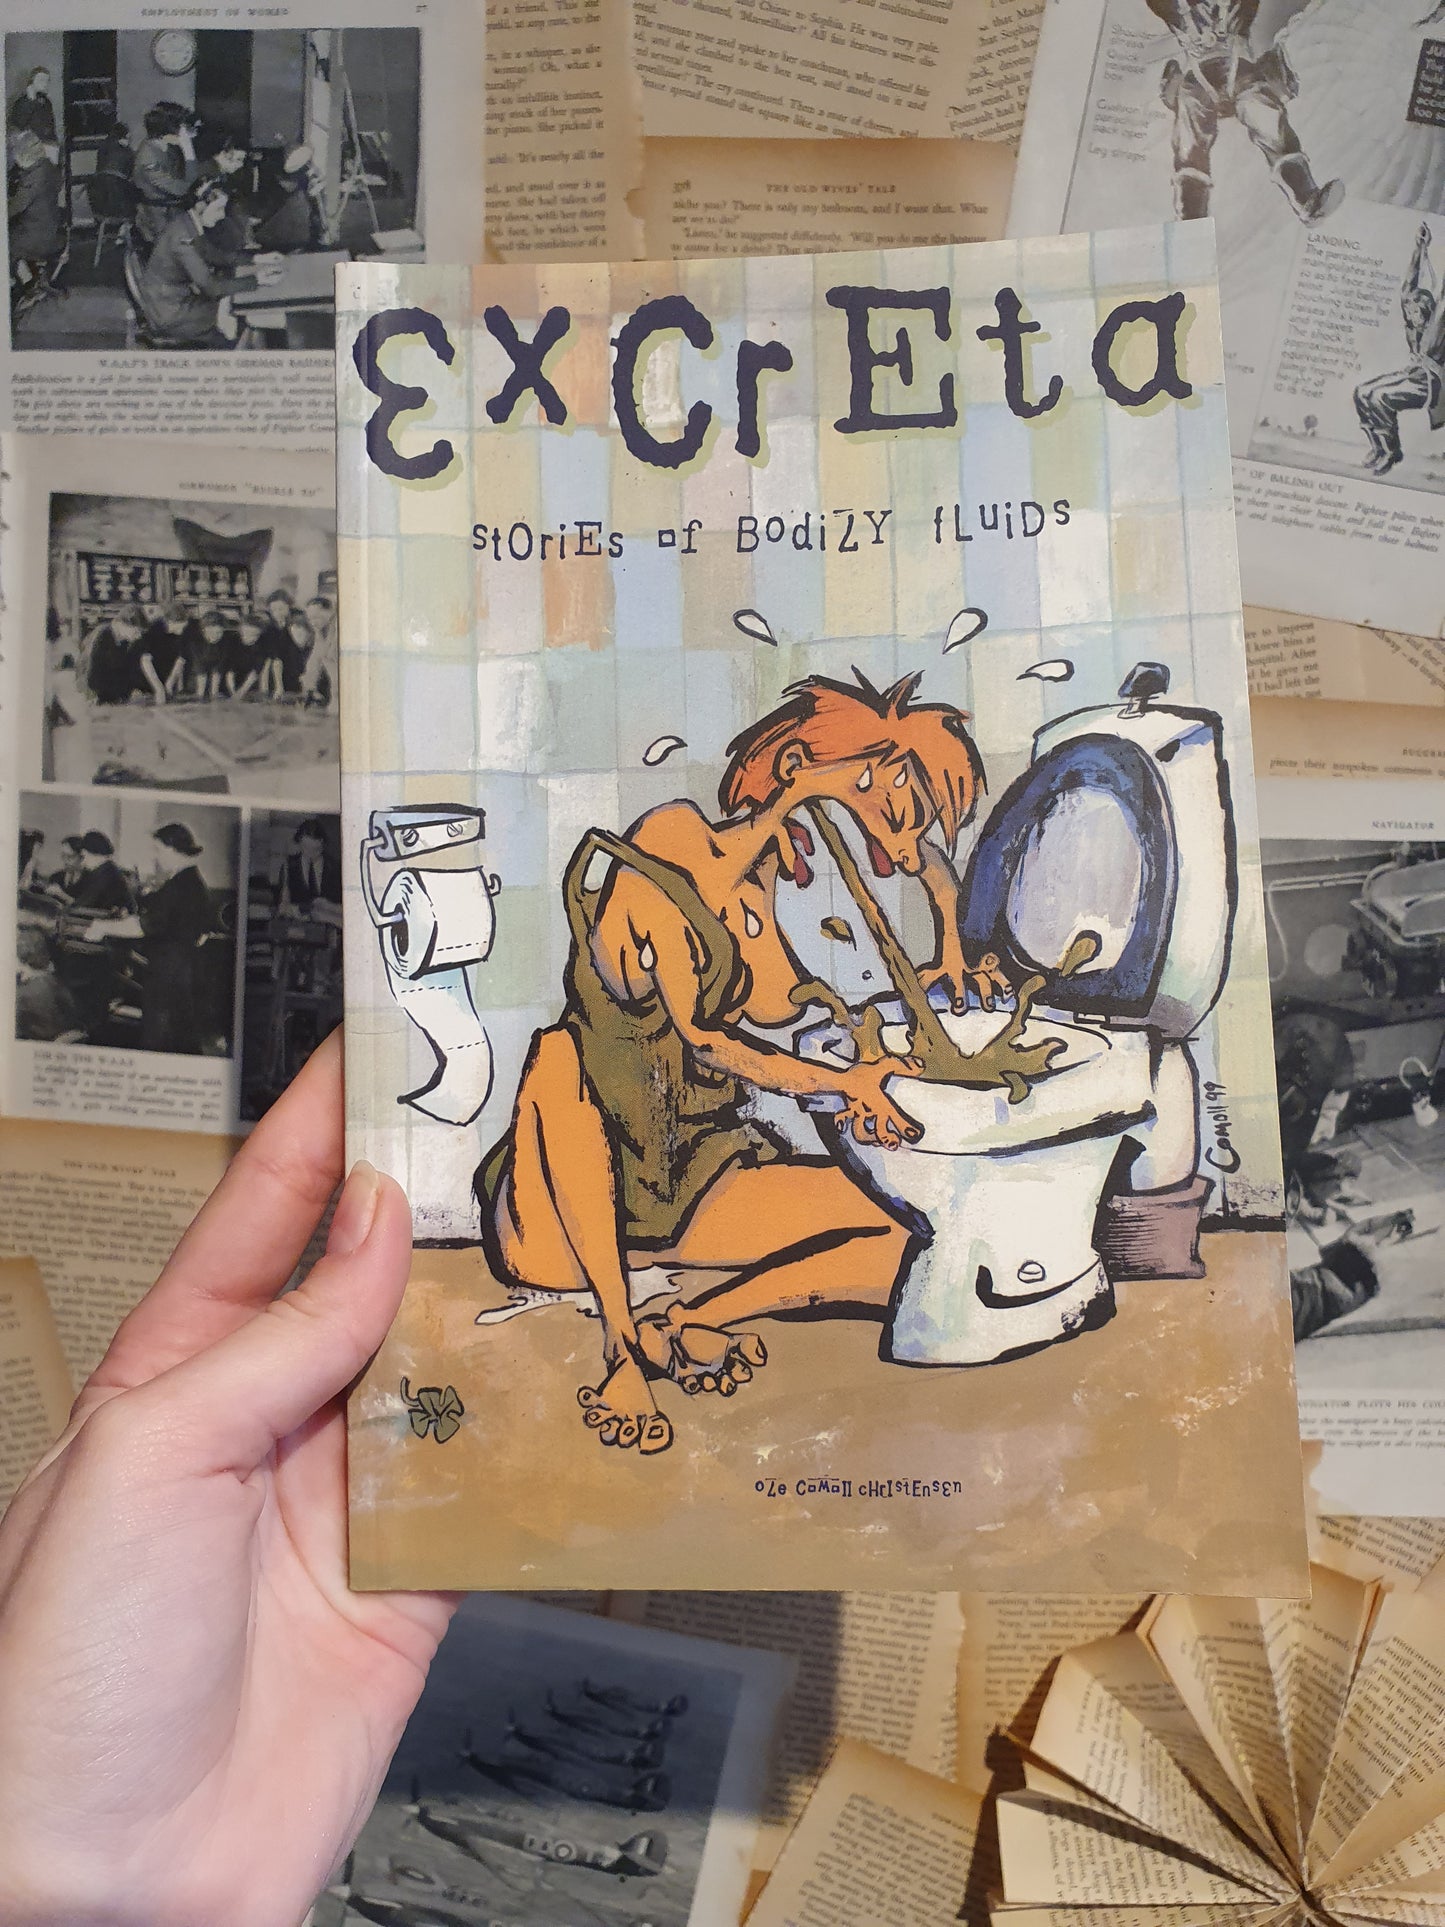 Excreta: Stories of Bodily Fluids by O. Camall Christensen (1999)